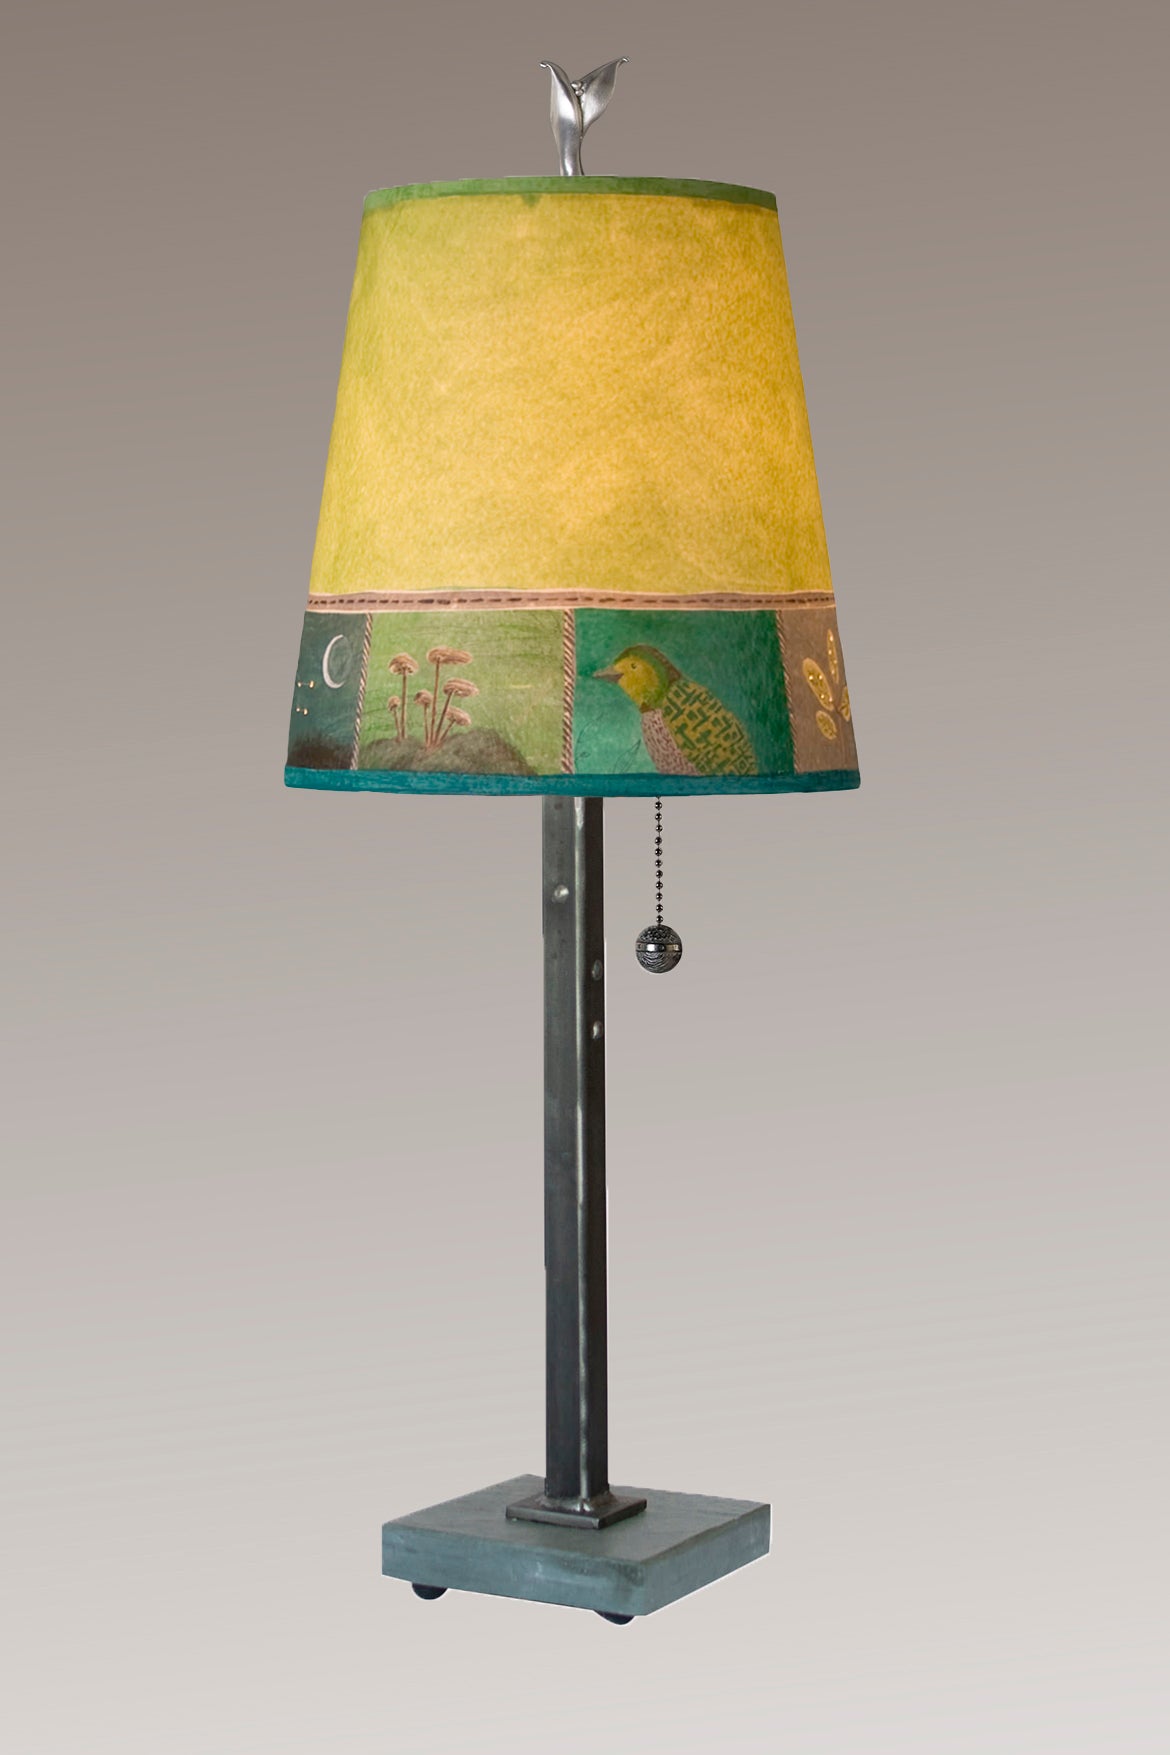 Janna Ugone & Co Table Lamps Steel Table Lamp with Small Drum Shade in Woodland Trails in Leaf